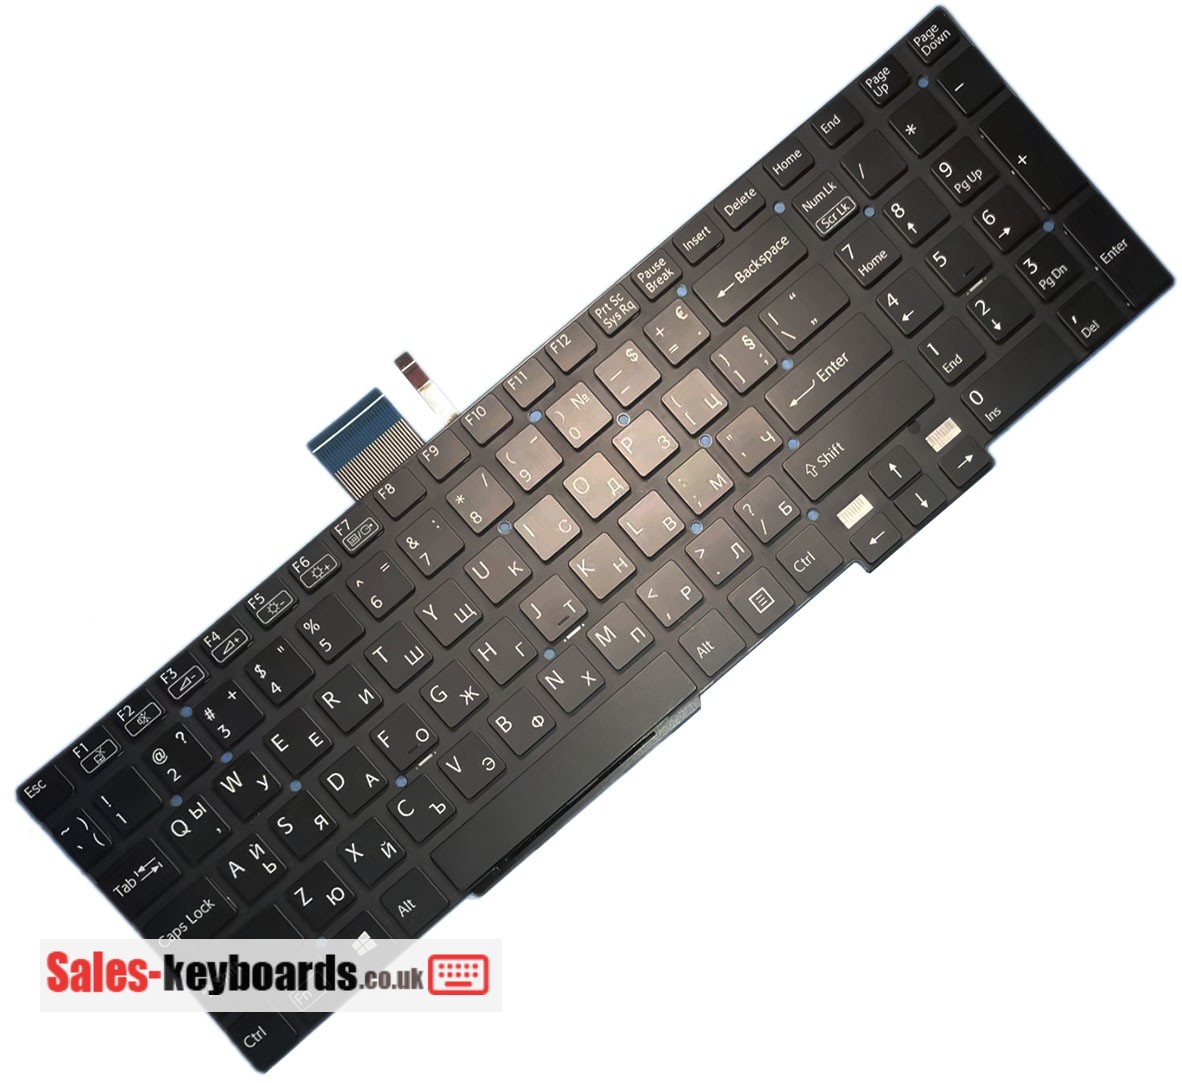 Sony VAIO SVT15114CYS Keyboard replacement